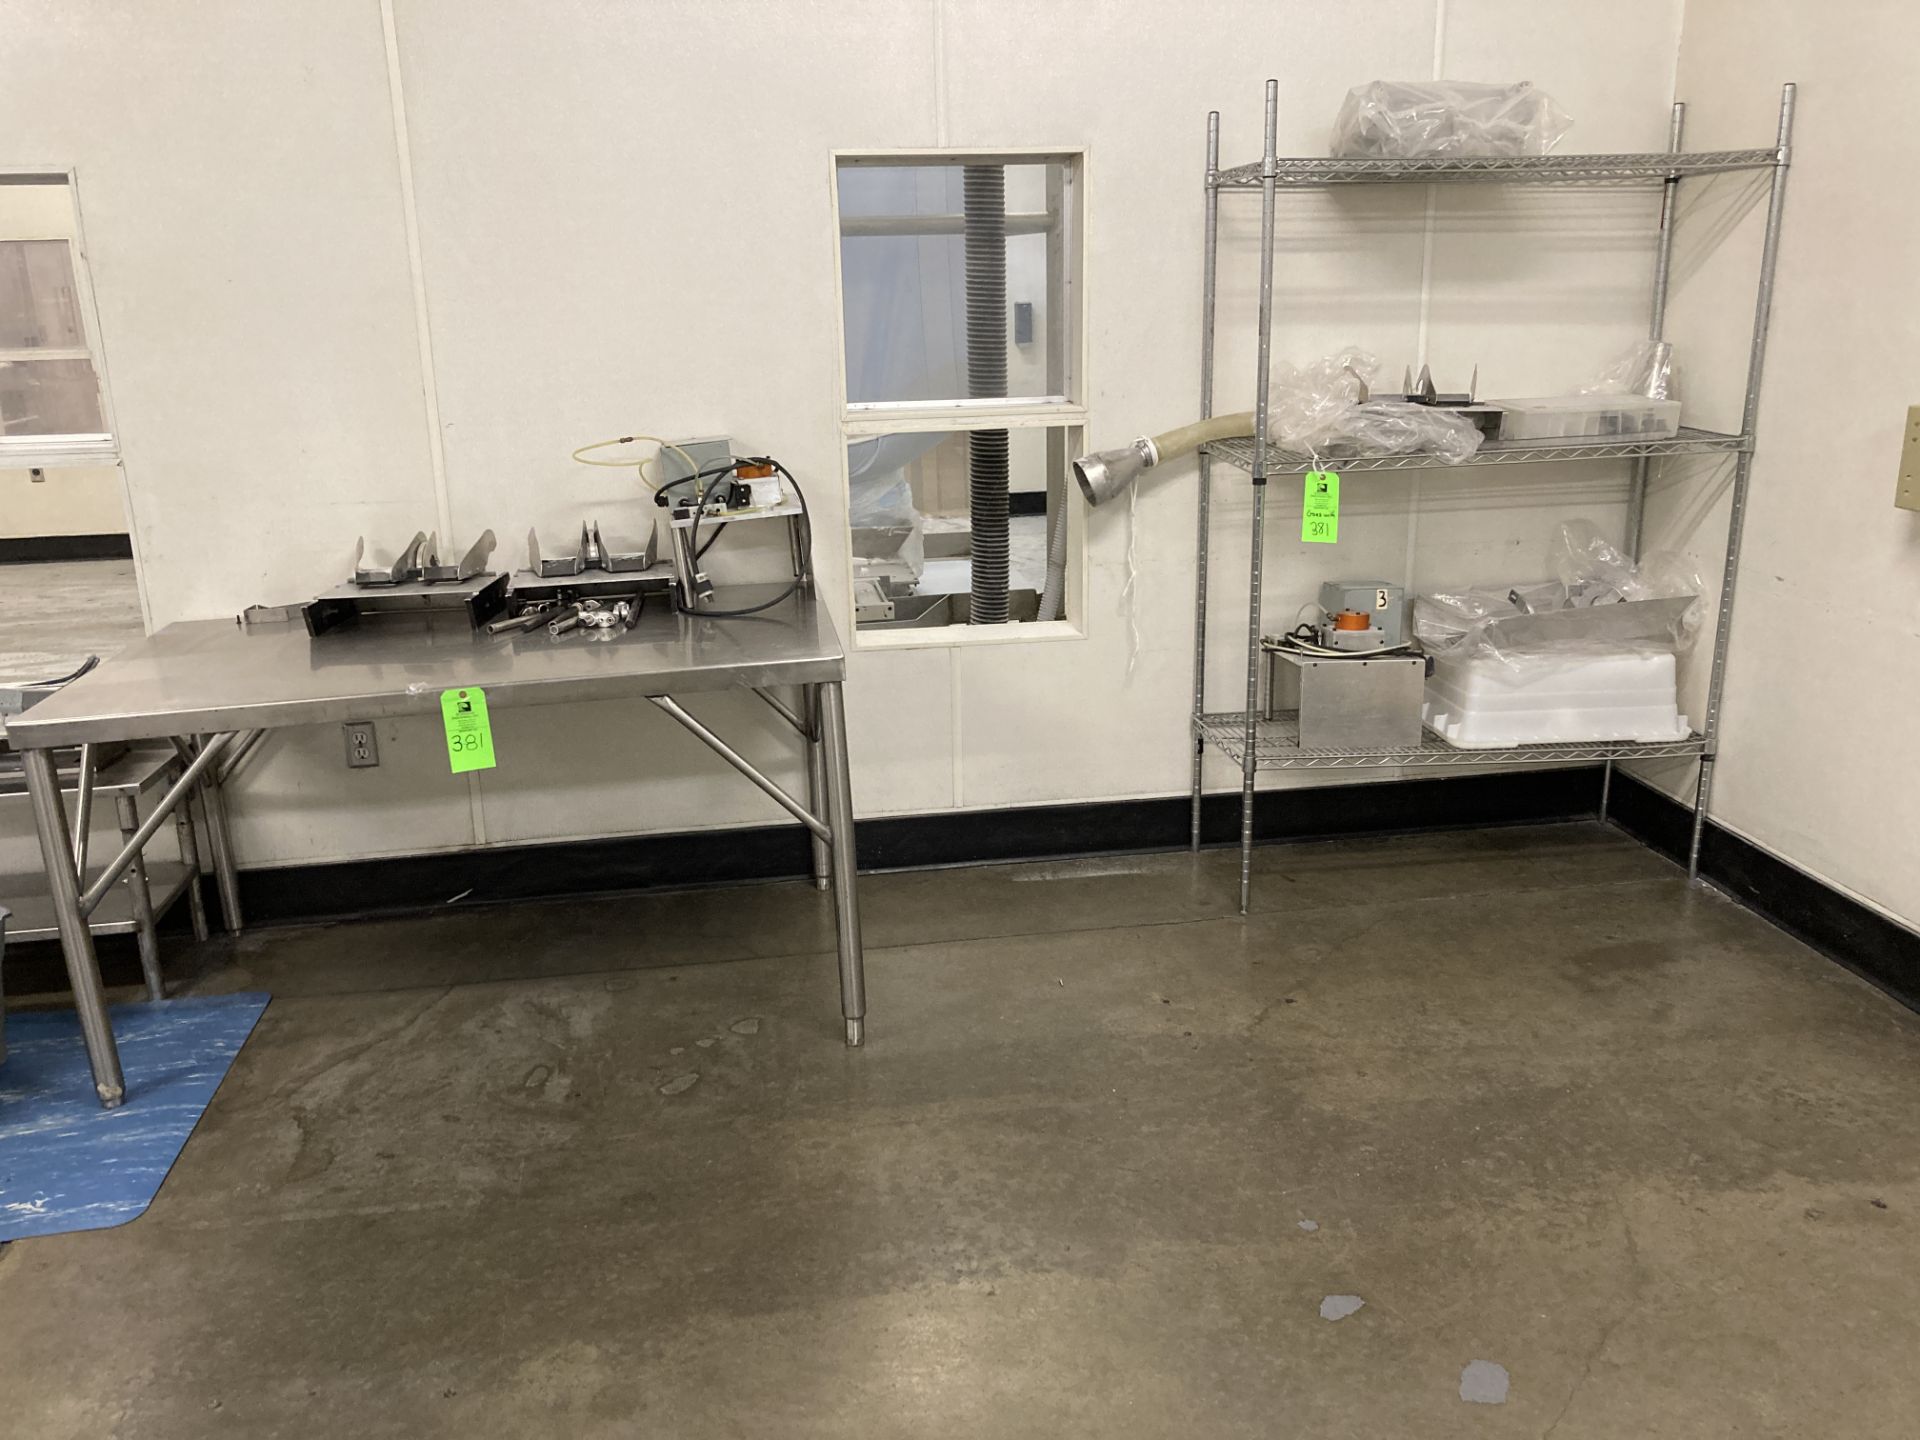 LOT OF stainless steel table 60 in x 36 in x 32 in h and shelf unit 48 in x 16 in 76 in Rigging Fee: